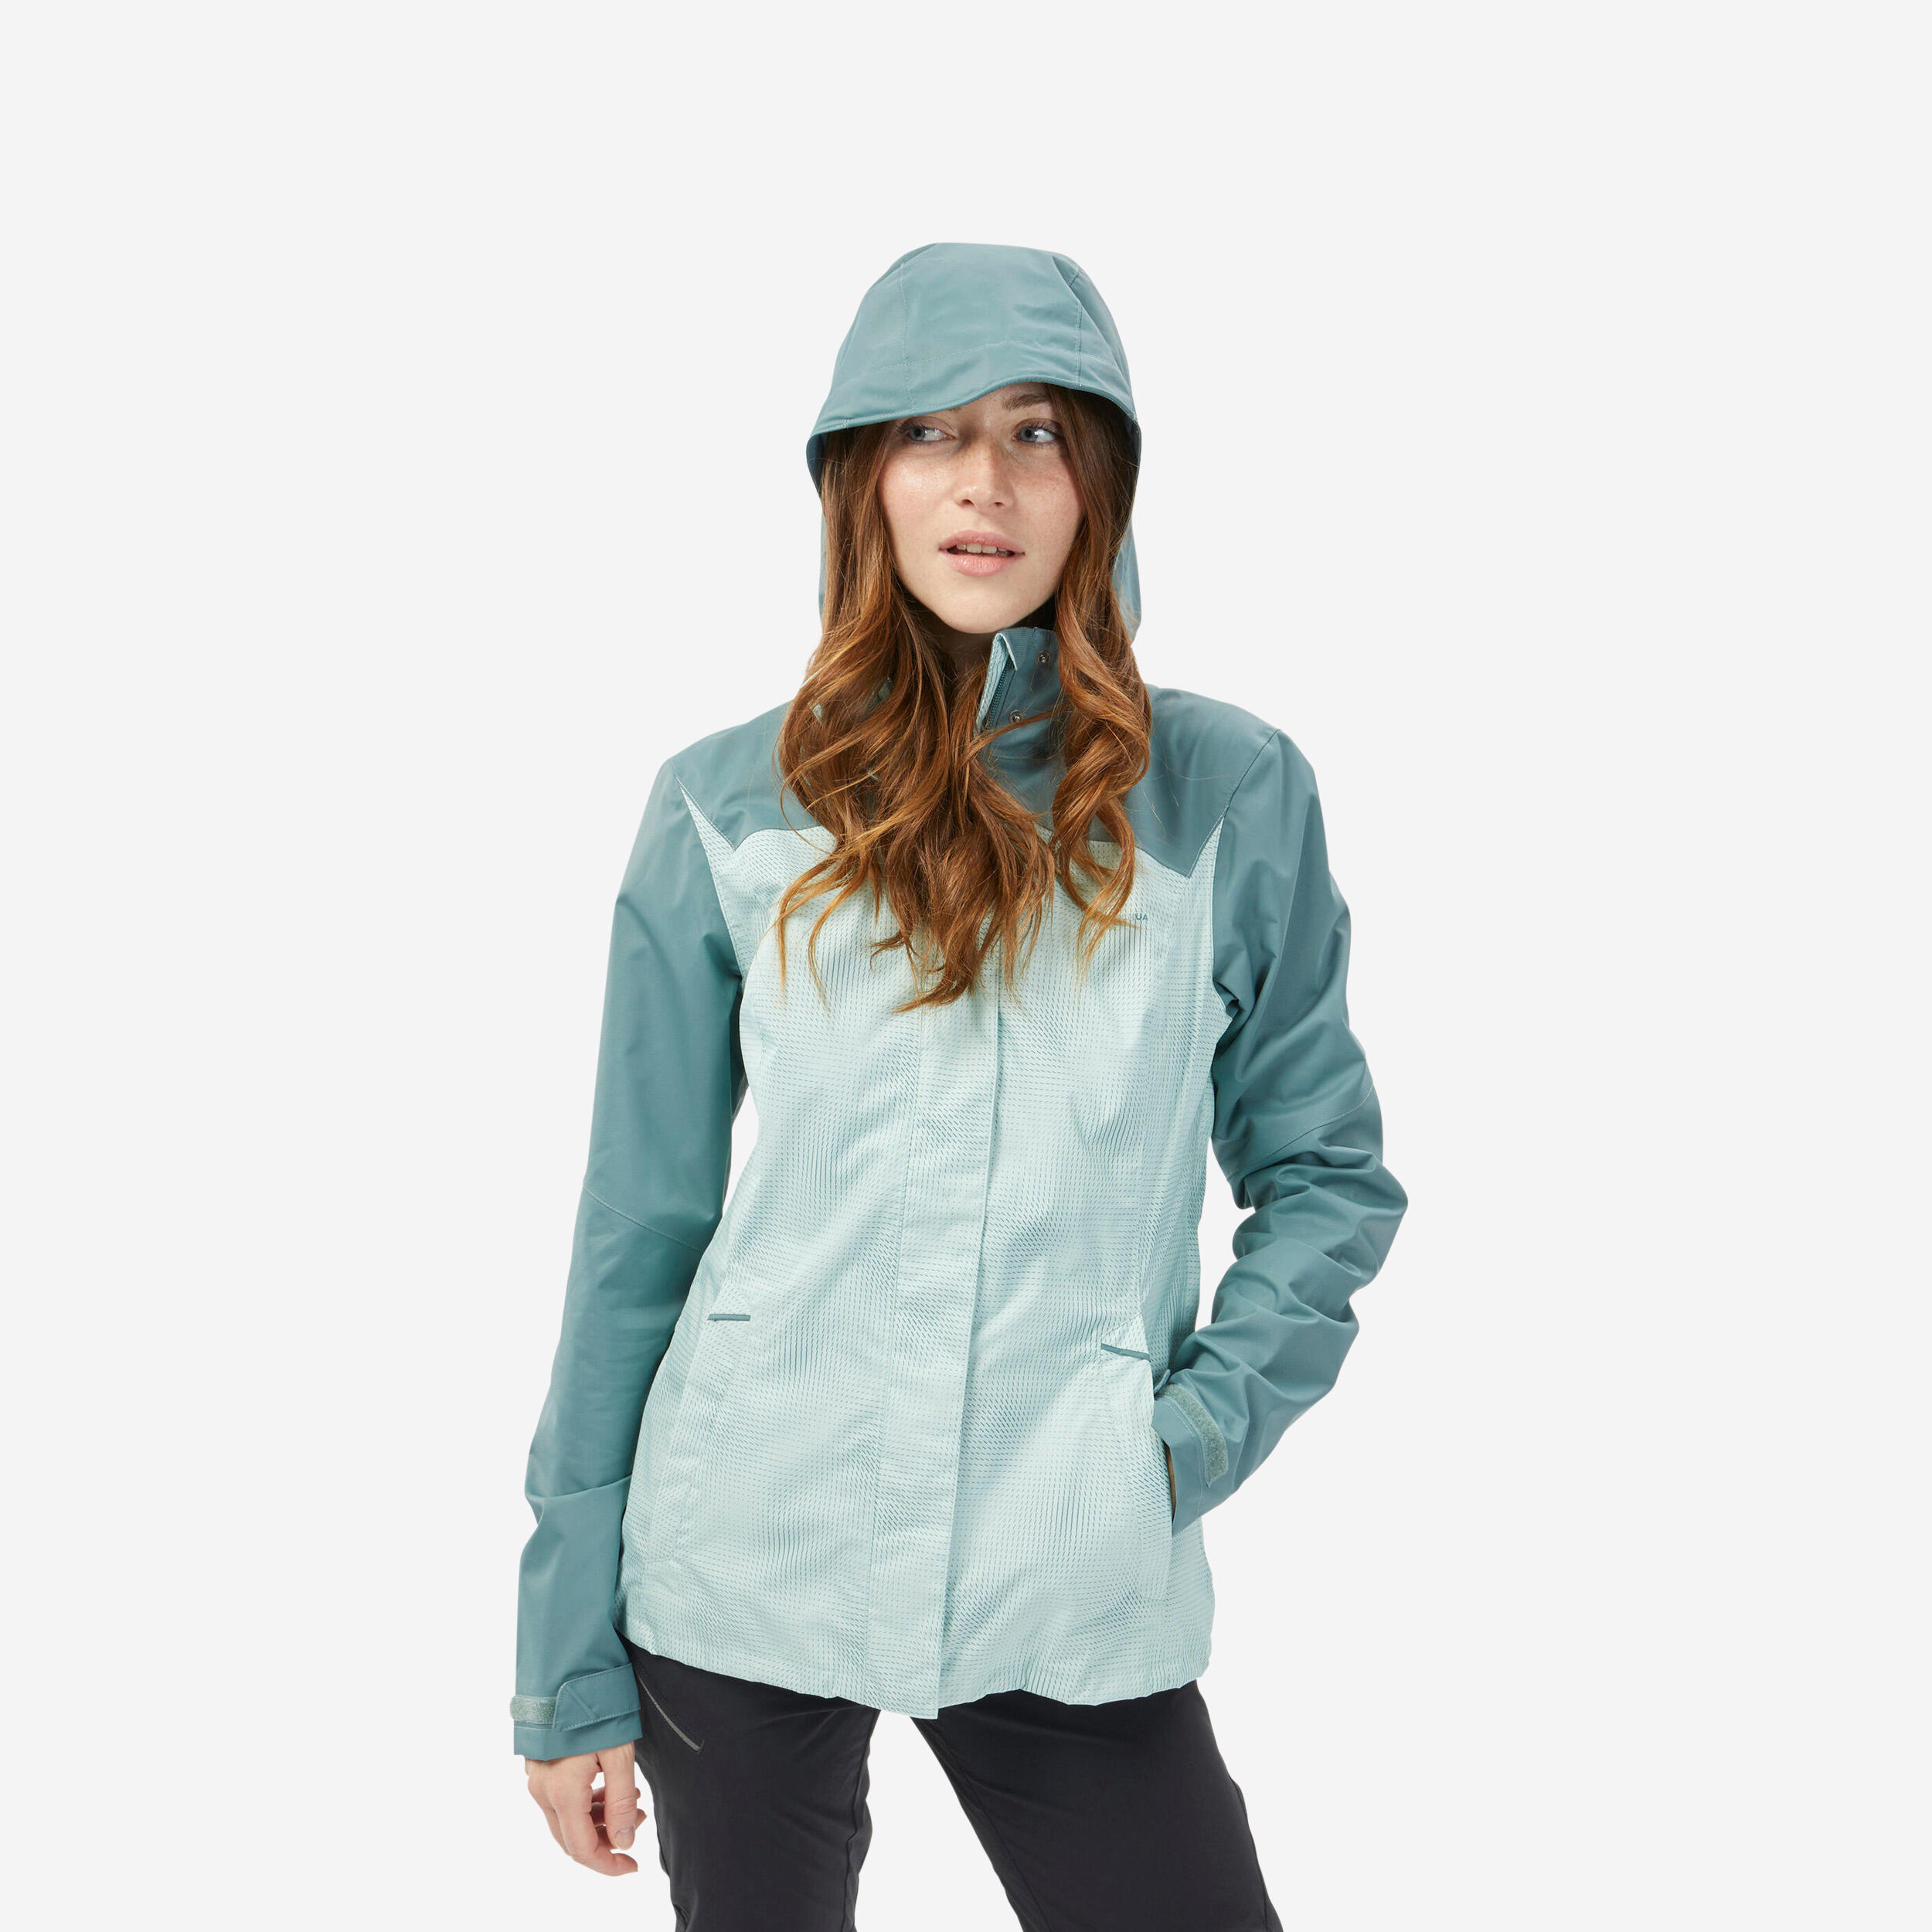 Image of Women’s Hiking Jacket - MH 100 Green